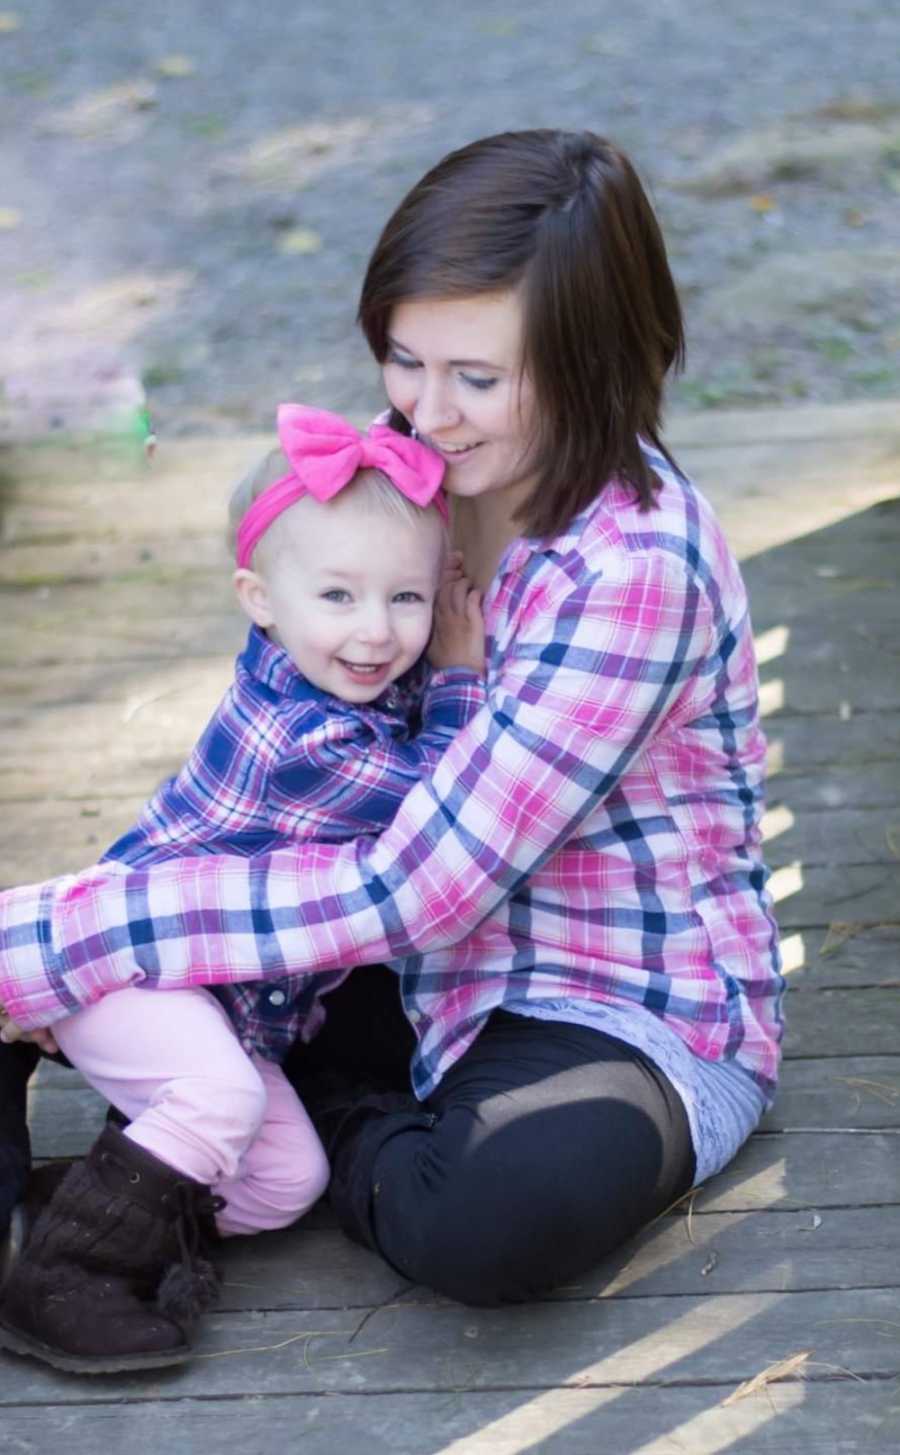 Woman who escaped abusive relationship sits on ground with toddler daughter smiling in her lap